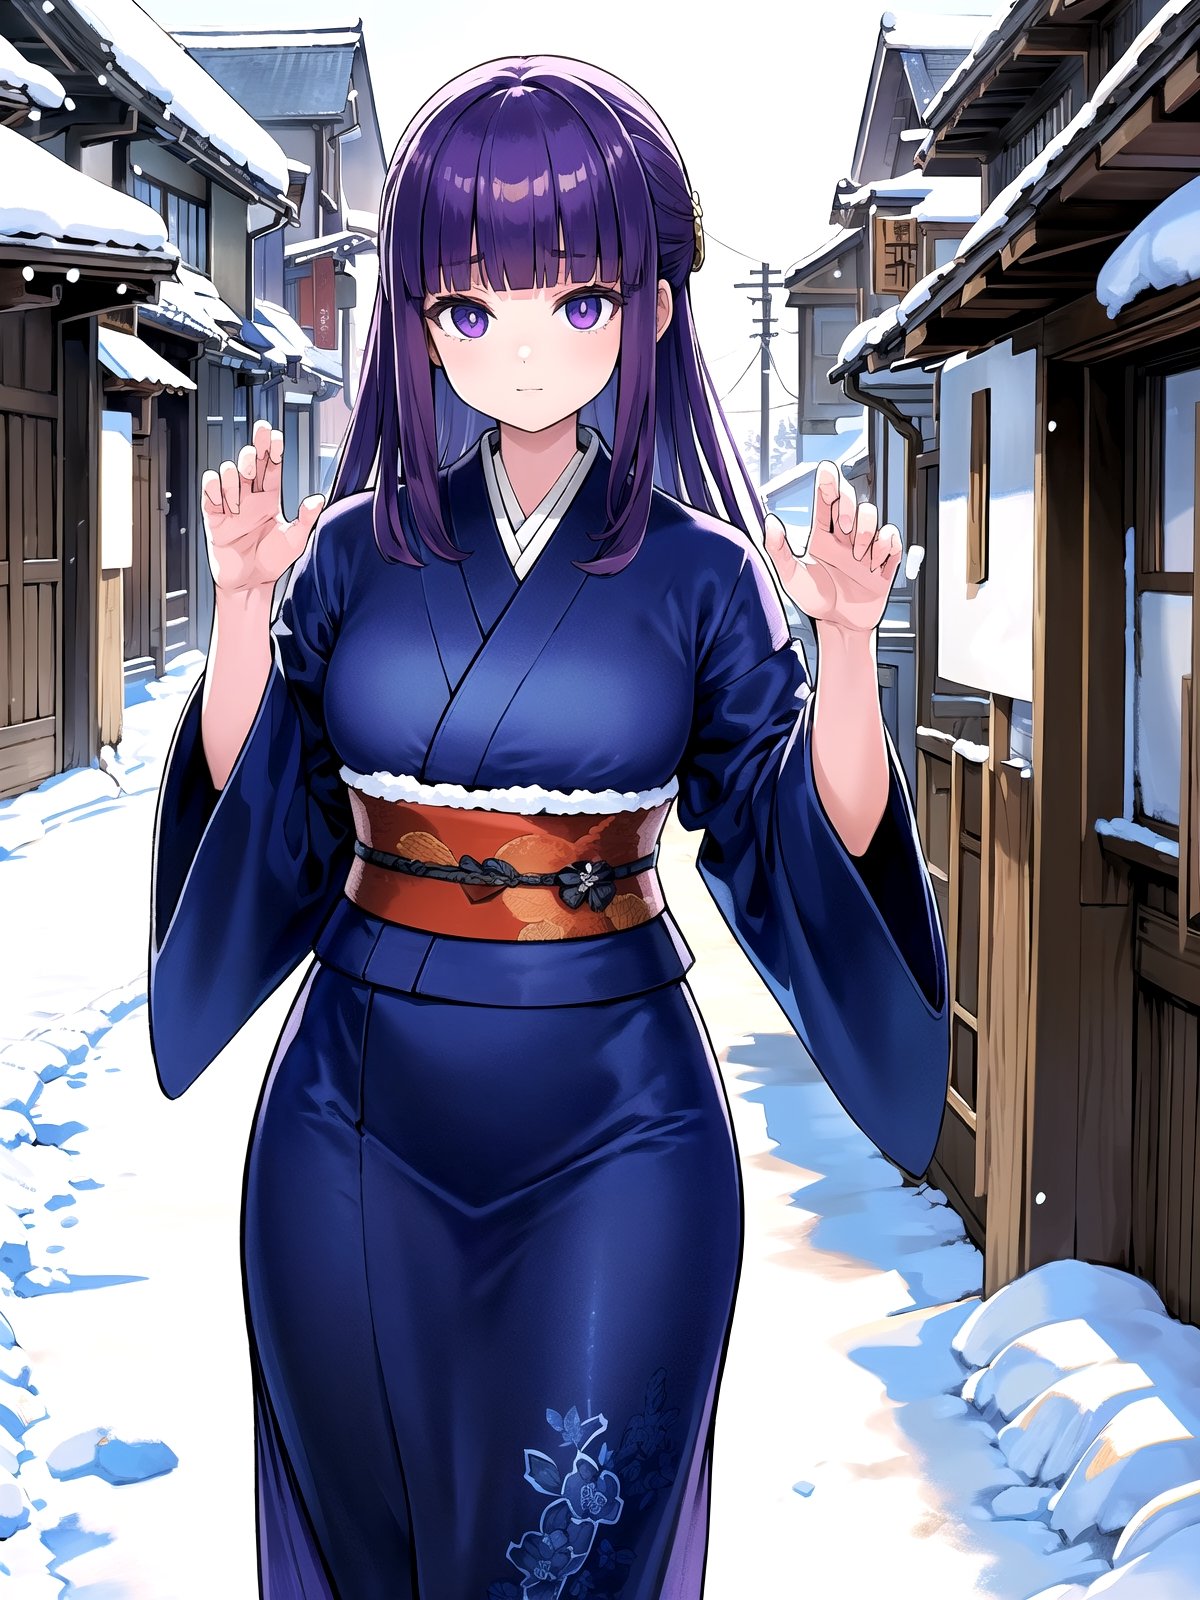 //Quality,
(masterpiece), (best quality), 8k illustration,
,//Character,
1girl, solo,
,//Fashion,
details (dark blue silk brocade kimono)
,//Background,
Kyoto, outdoors, winter, snow
,//Others,
goodbye pose,aafern, long hair, purple hair